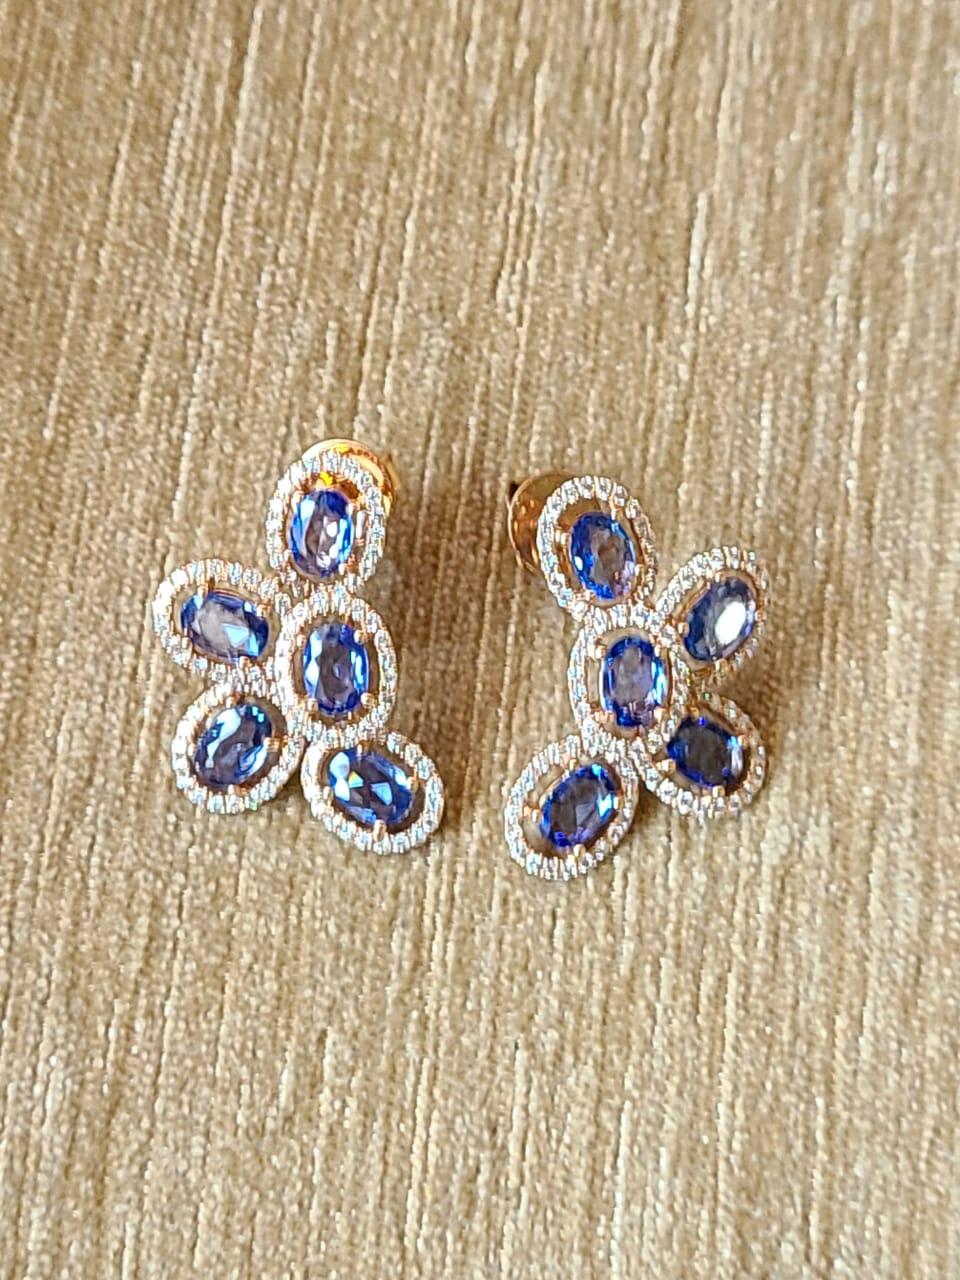 A very gorgeous and dainty pair of Blue Sapphire Earrings set in 18K Gold & Diamonds. The weight of the Blue Sapphires is 4.37 carats. The Blue Sapphires are of Ceylon (Sri Lankan) origin. The weight of the Diamonds is 1.02 carats. Net Gold weight